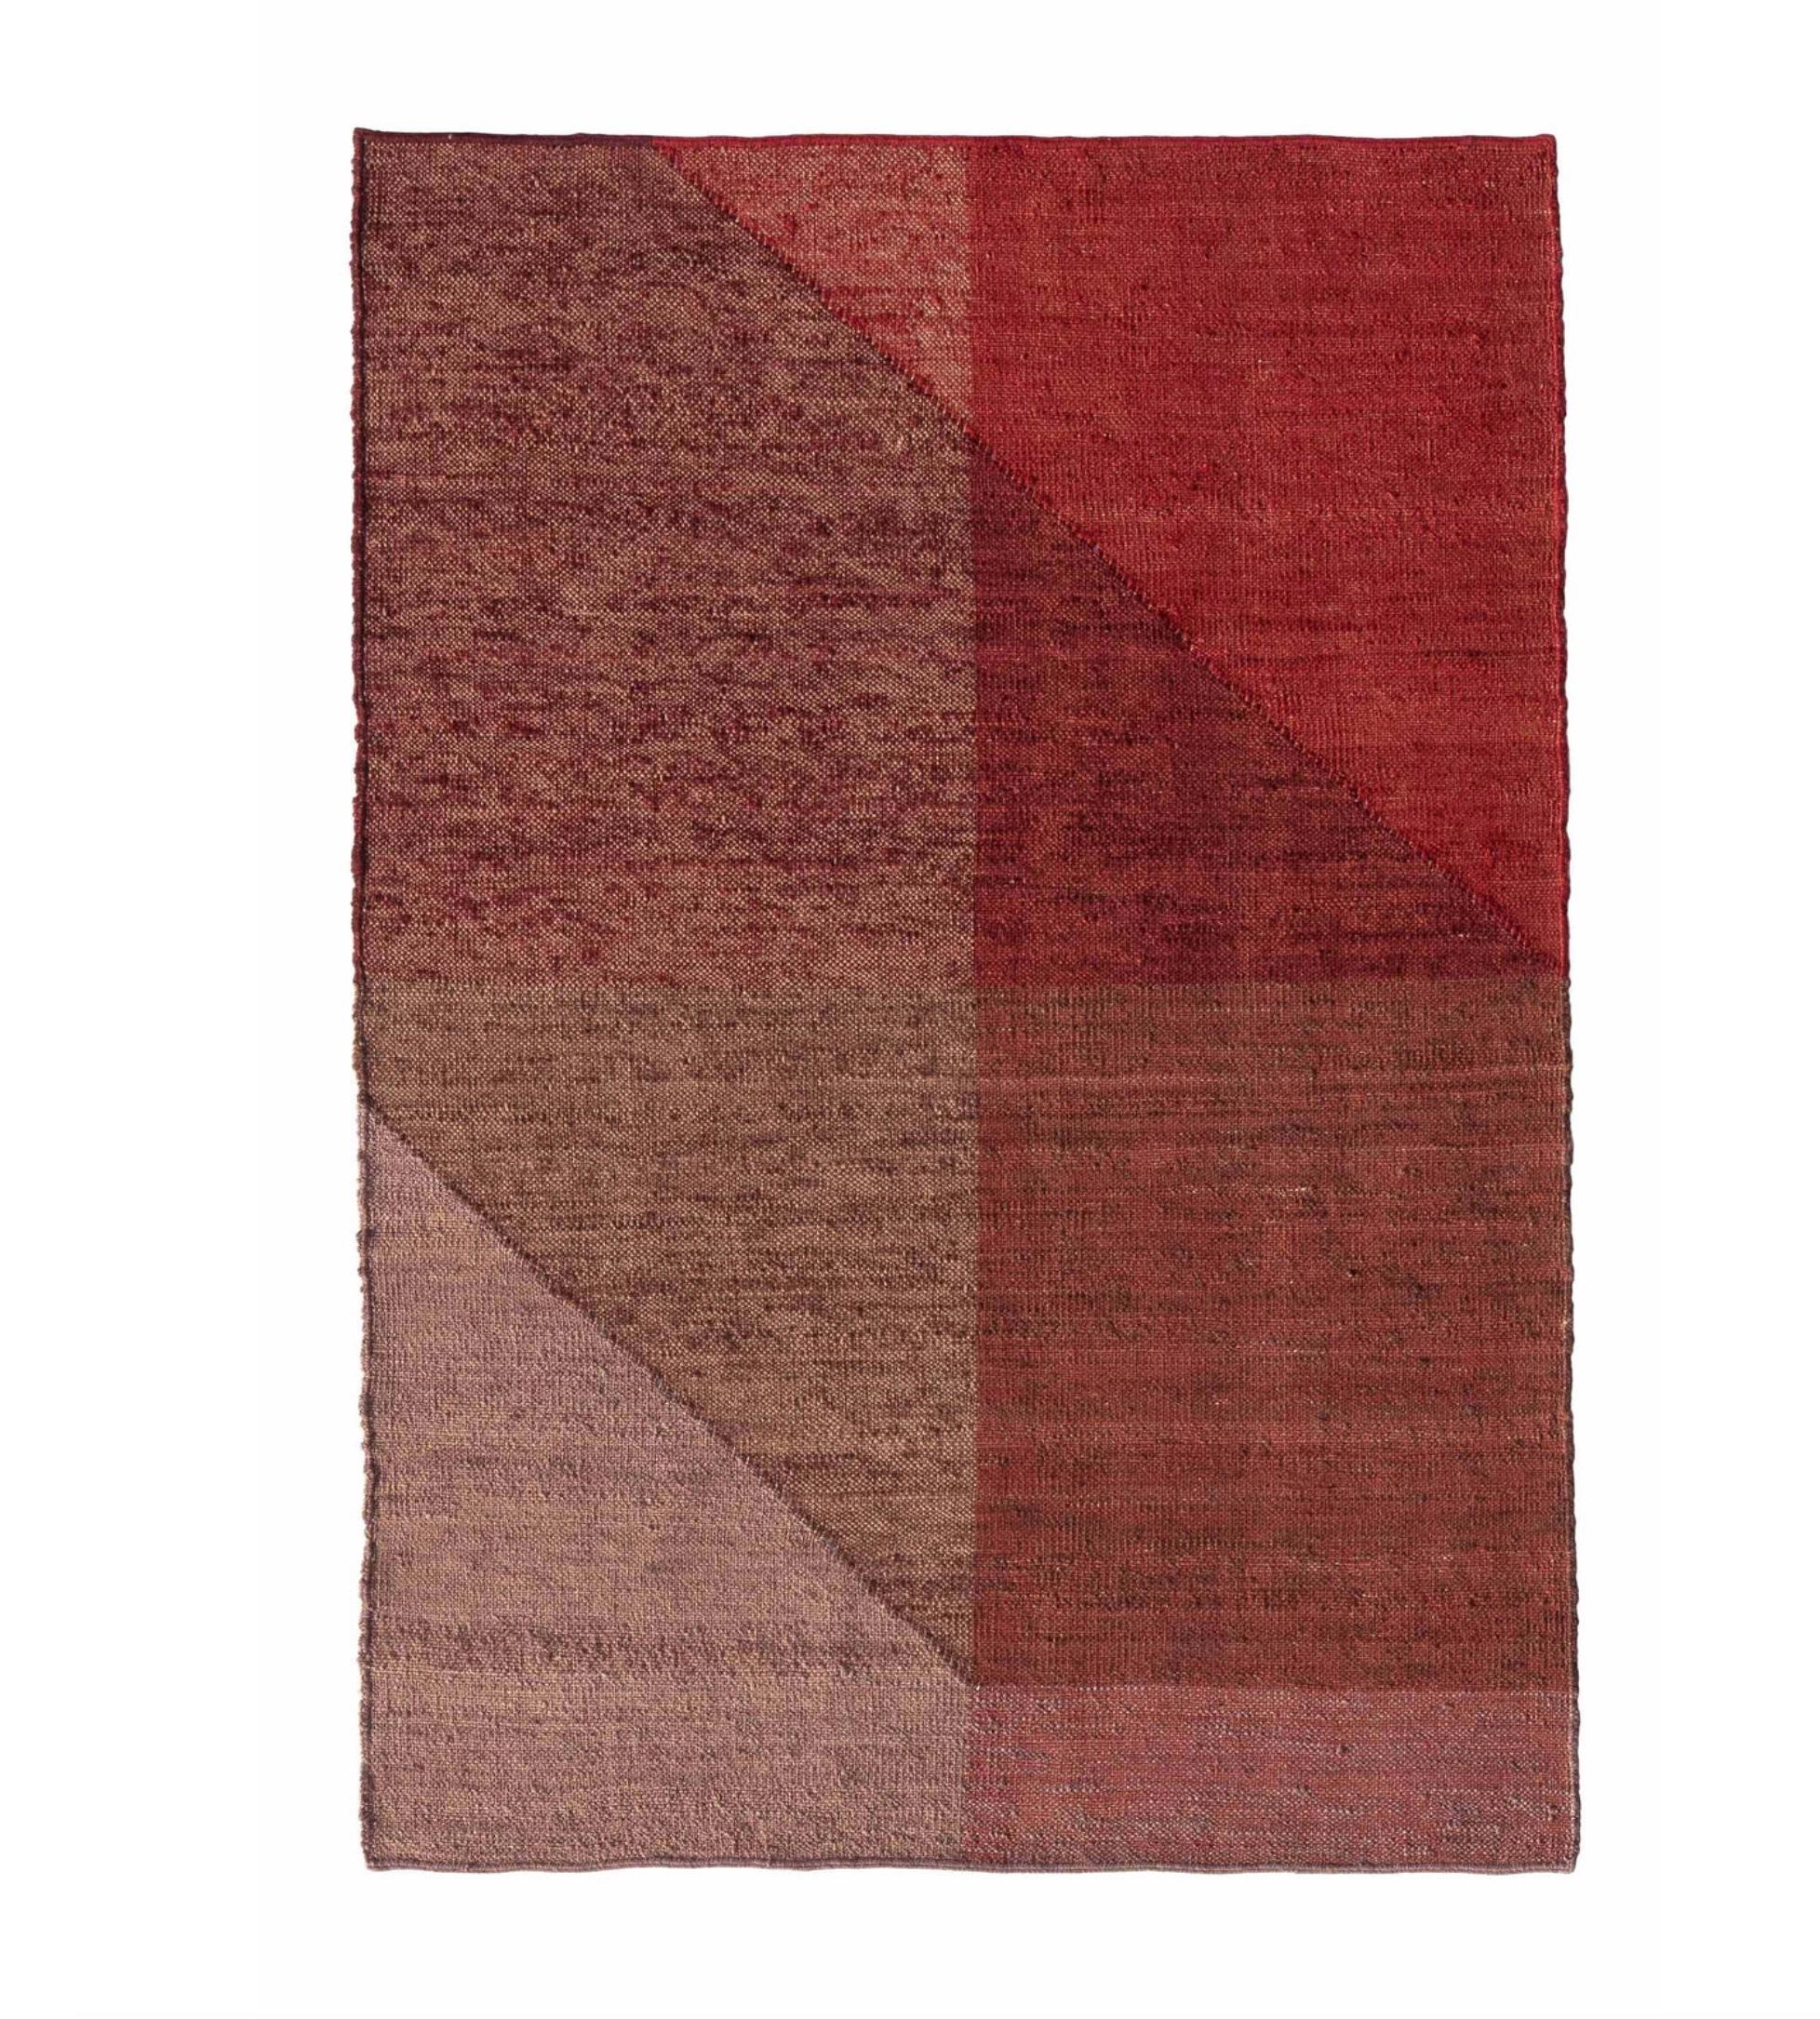 Mathias Hahn 'Capas 1' Kilim Rug for Nanimarquina. Current production, Spain.

By using layers, Mathias Han manages to create a variety of tonalities, textures and shades. This is a light and informal rug, hand-woven using the ancestral Kilim